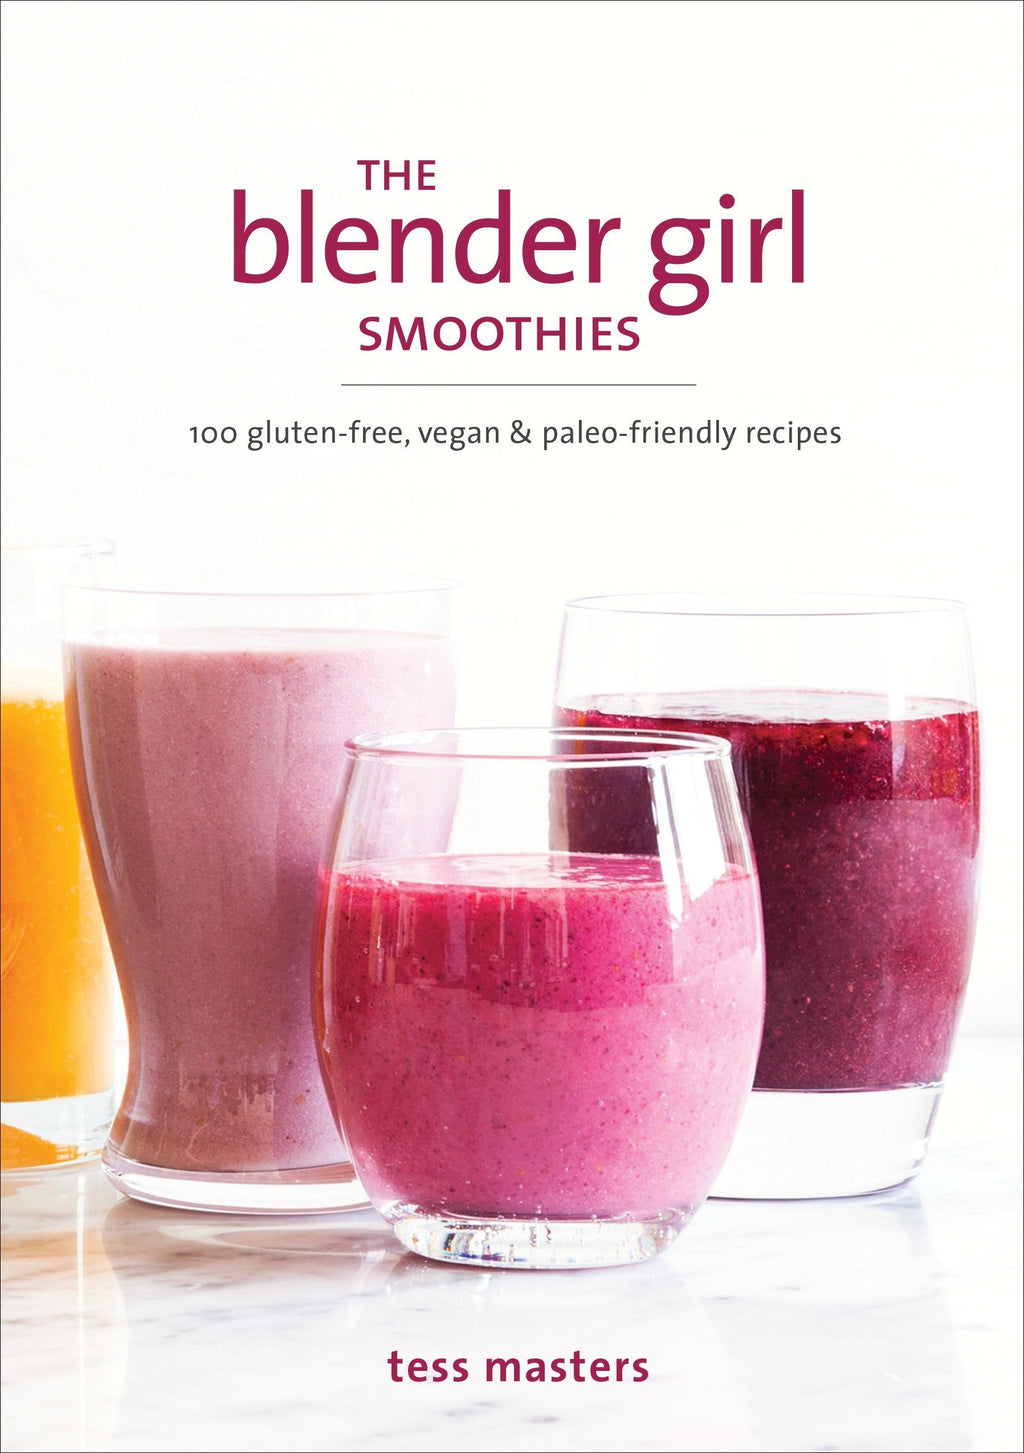 Blender Girl Smoothies by Tess Masters